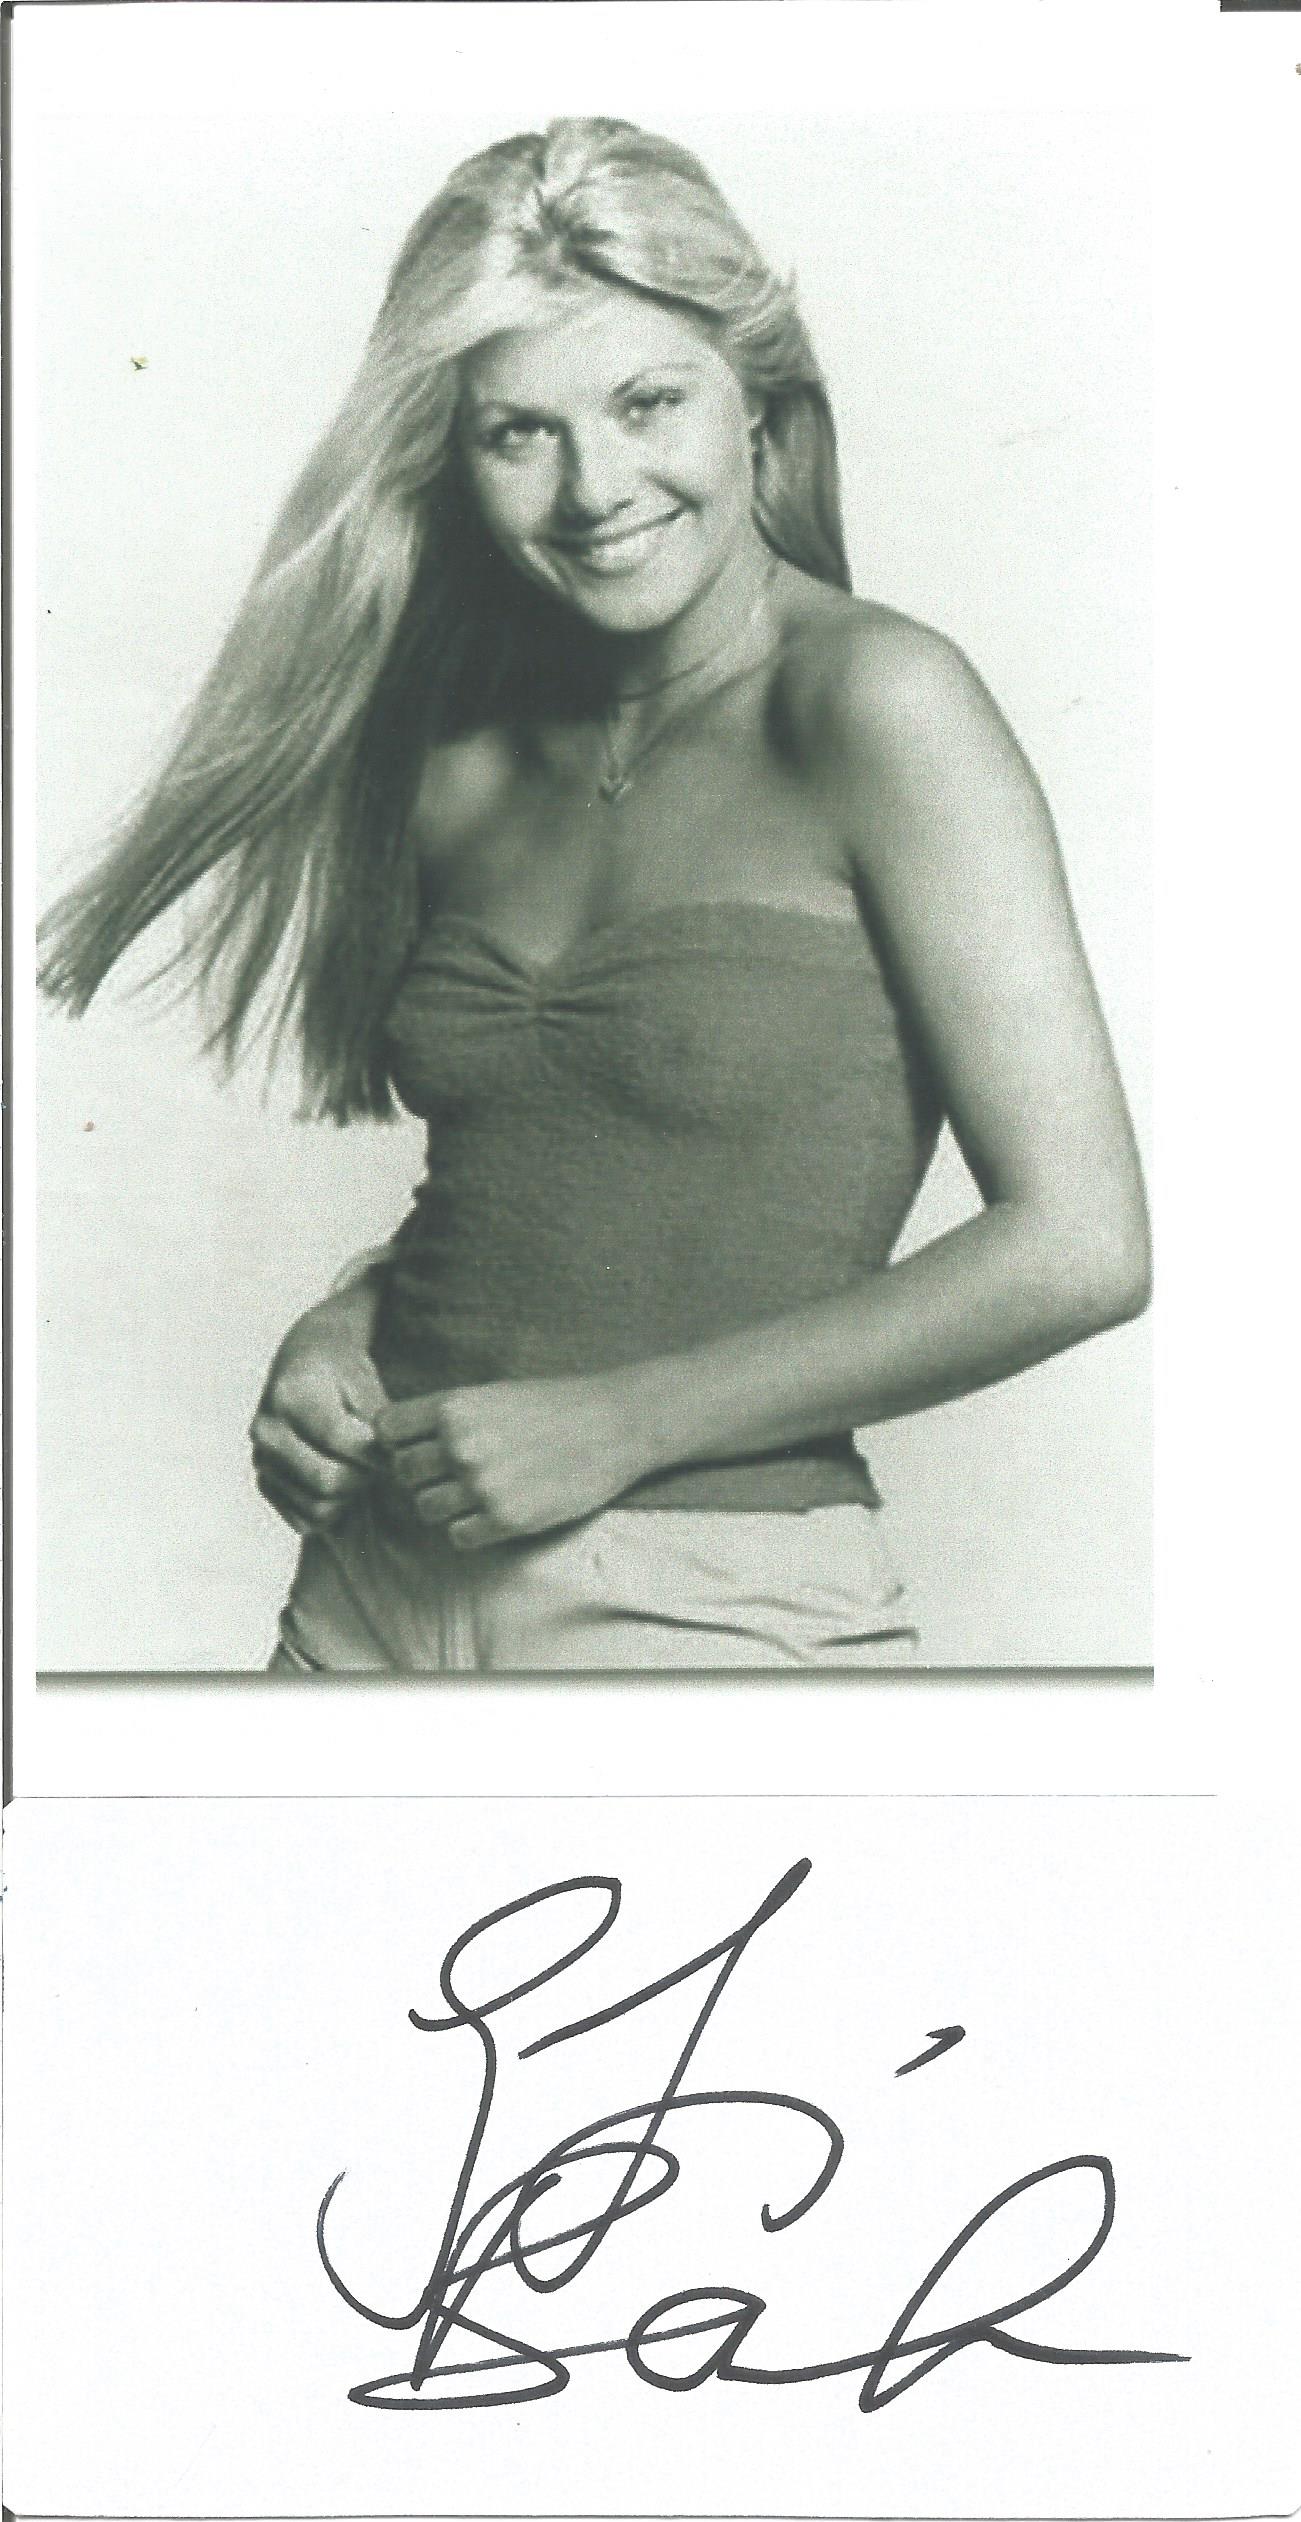 Glynis Barber signed 4x2 inch white card and 6x4 inch black and white photo. Good Condition. All